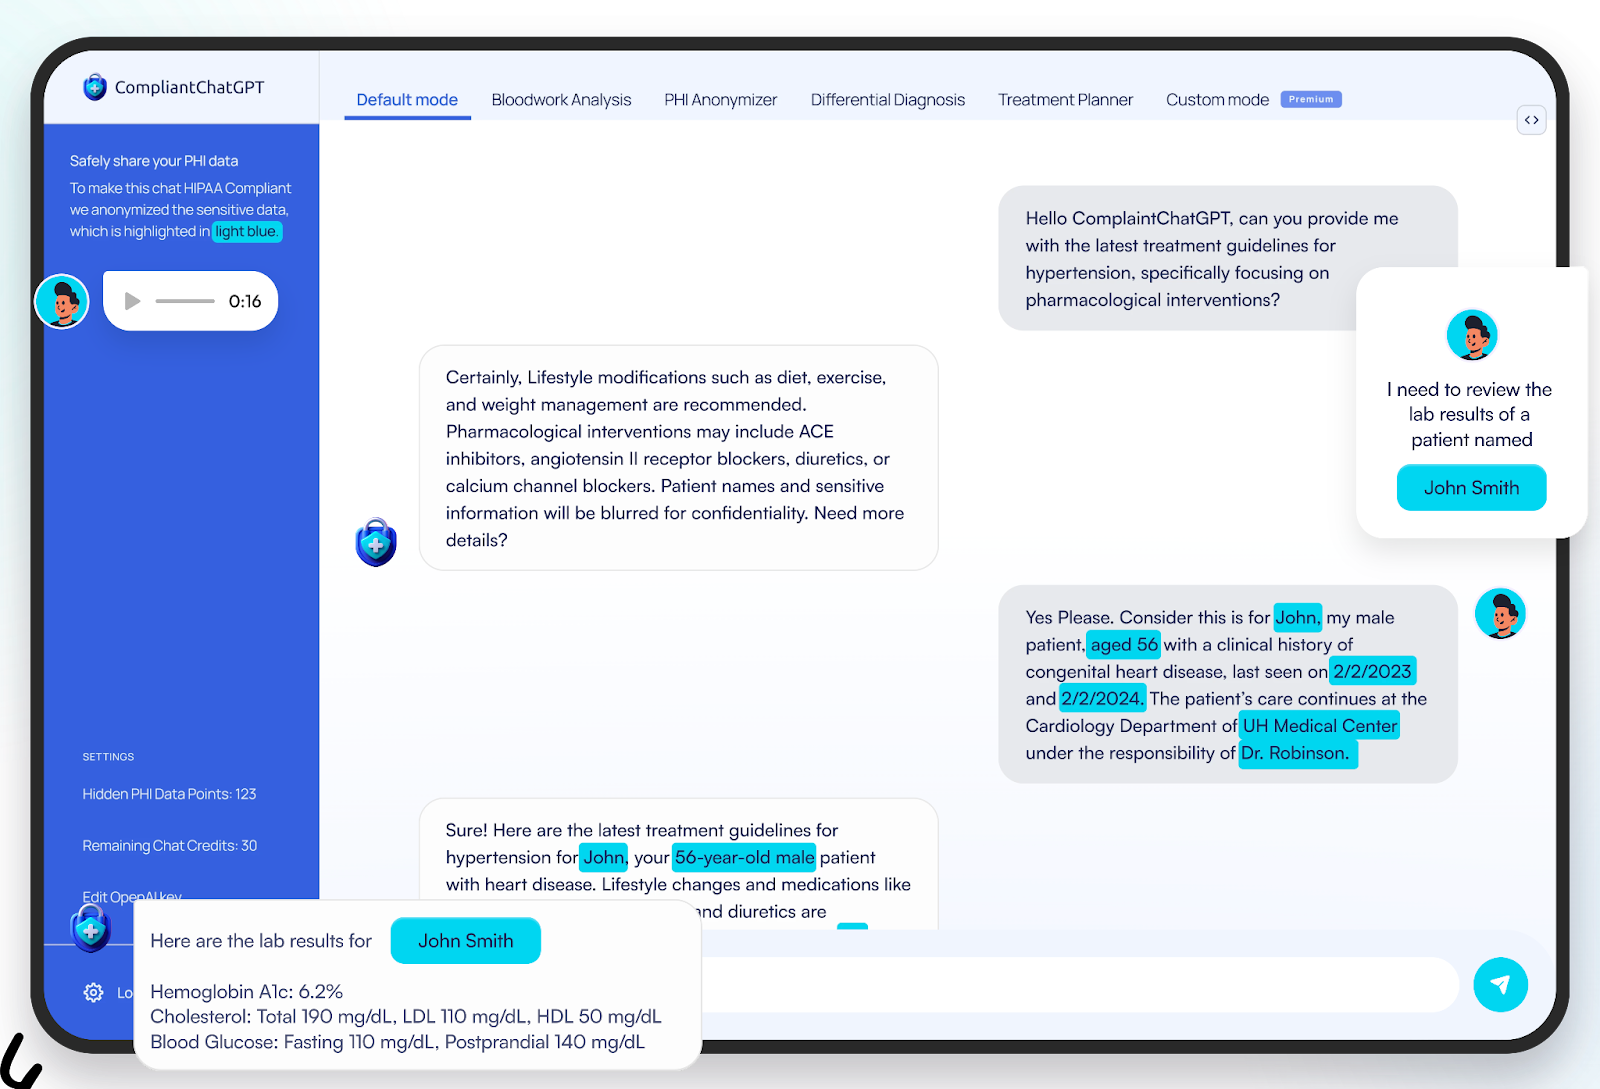 Screenshot of CompliantChatGPT's chatbot in blue, grey and white colors.